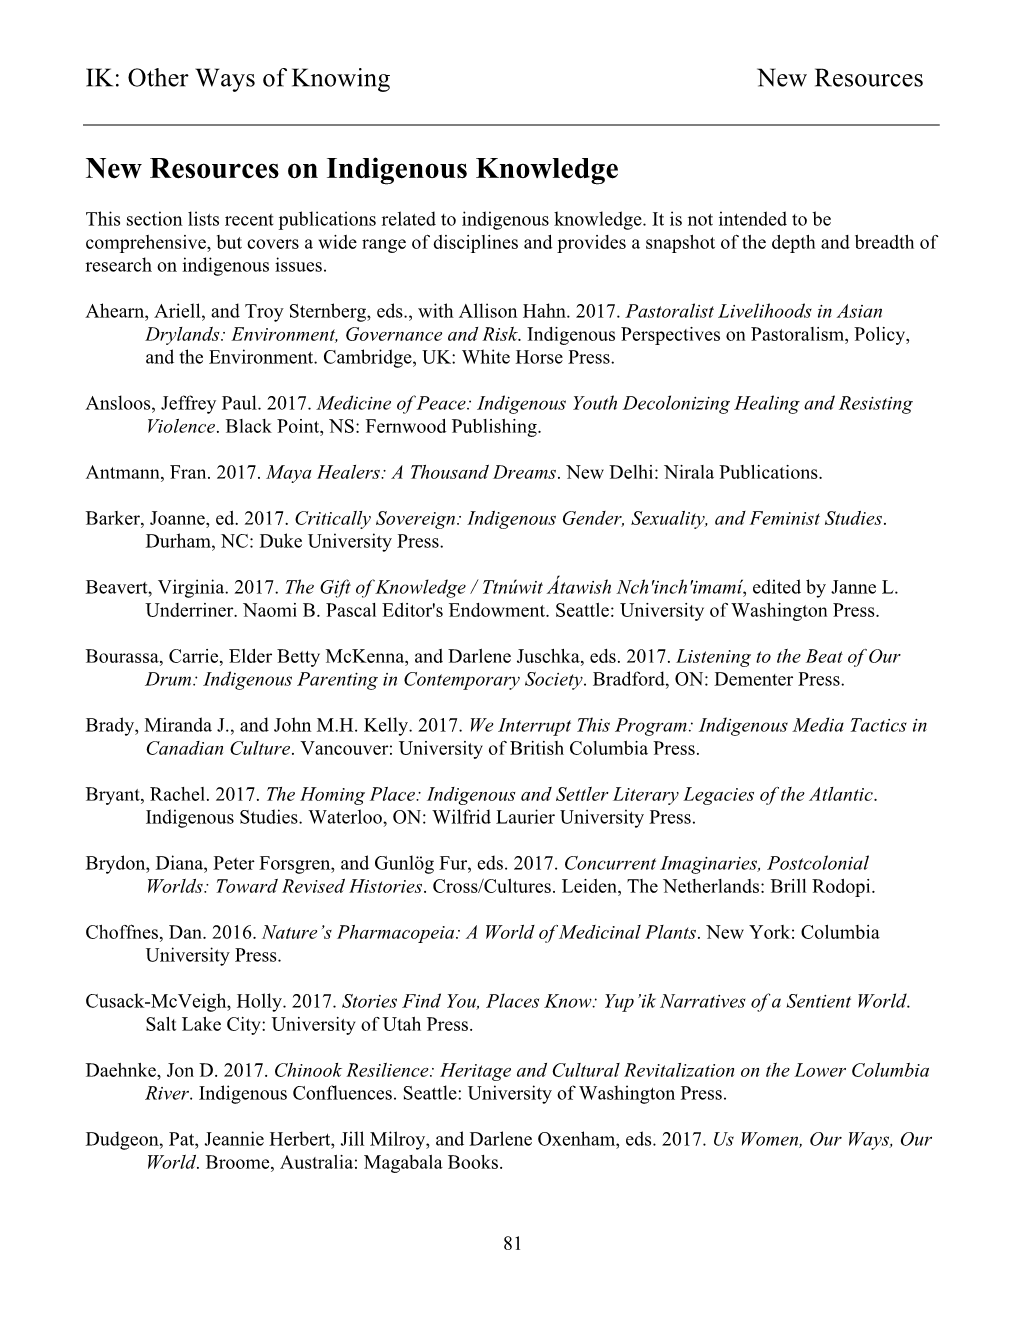 New Resources on Indigenous Knowledge